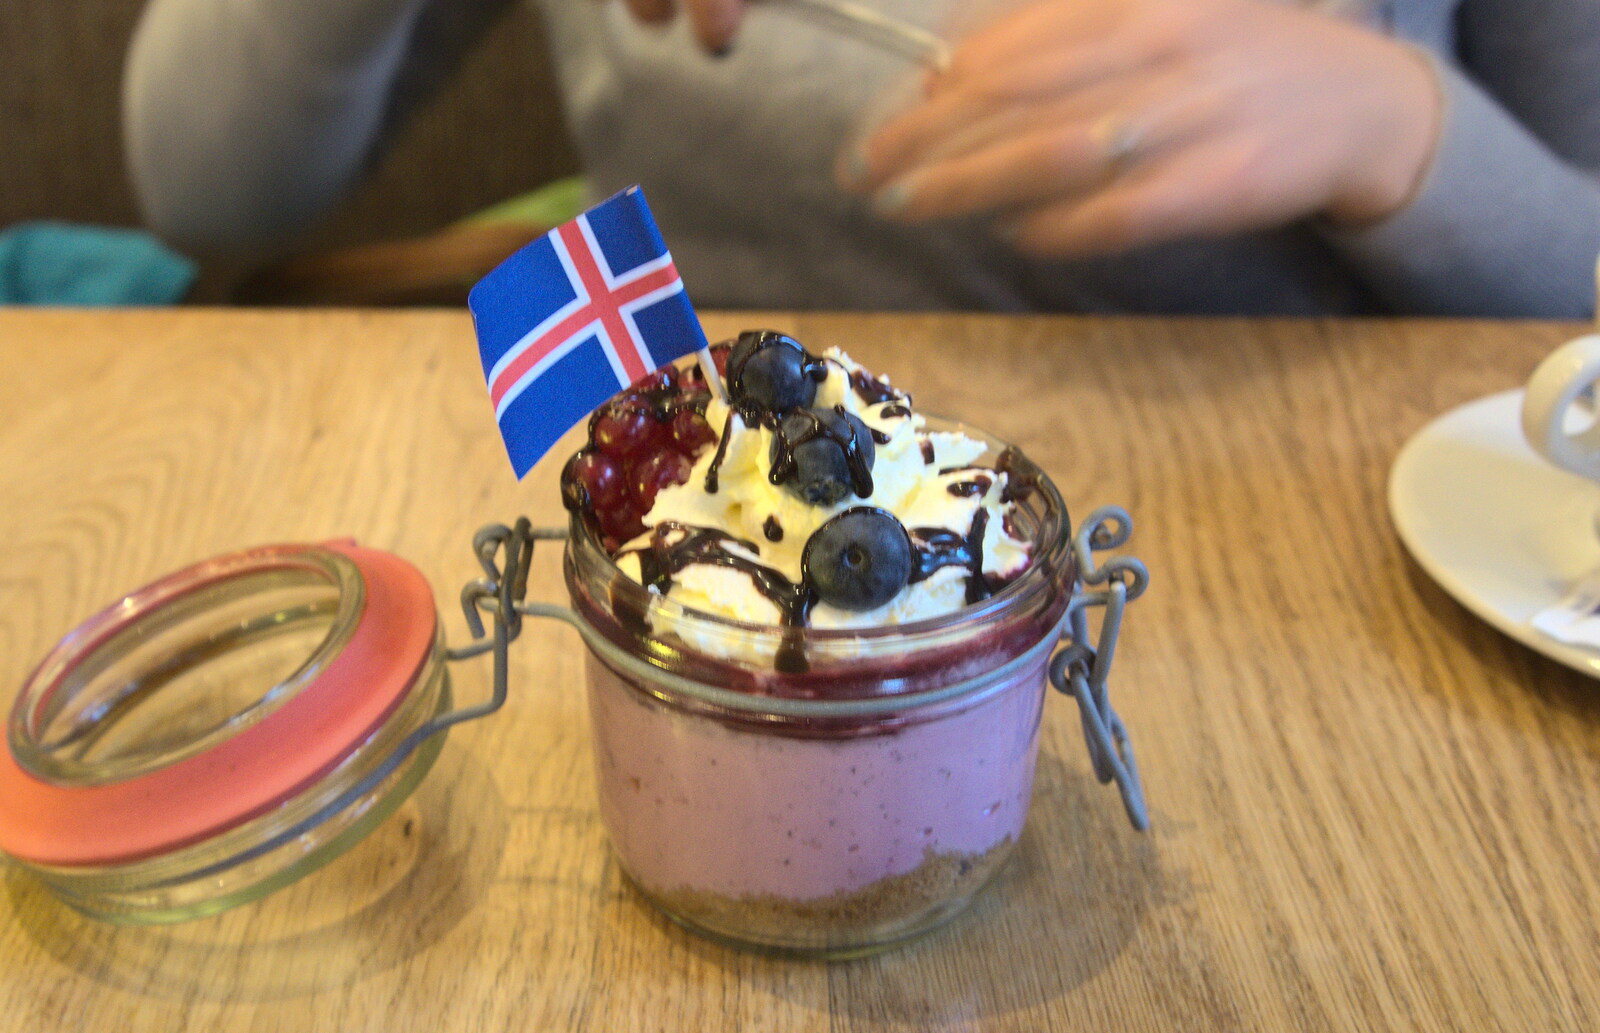 A nice little Icelandic pudding from A Trip to Reykjavik, Iceland - 20th April 2017